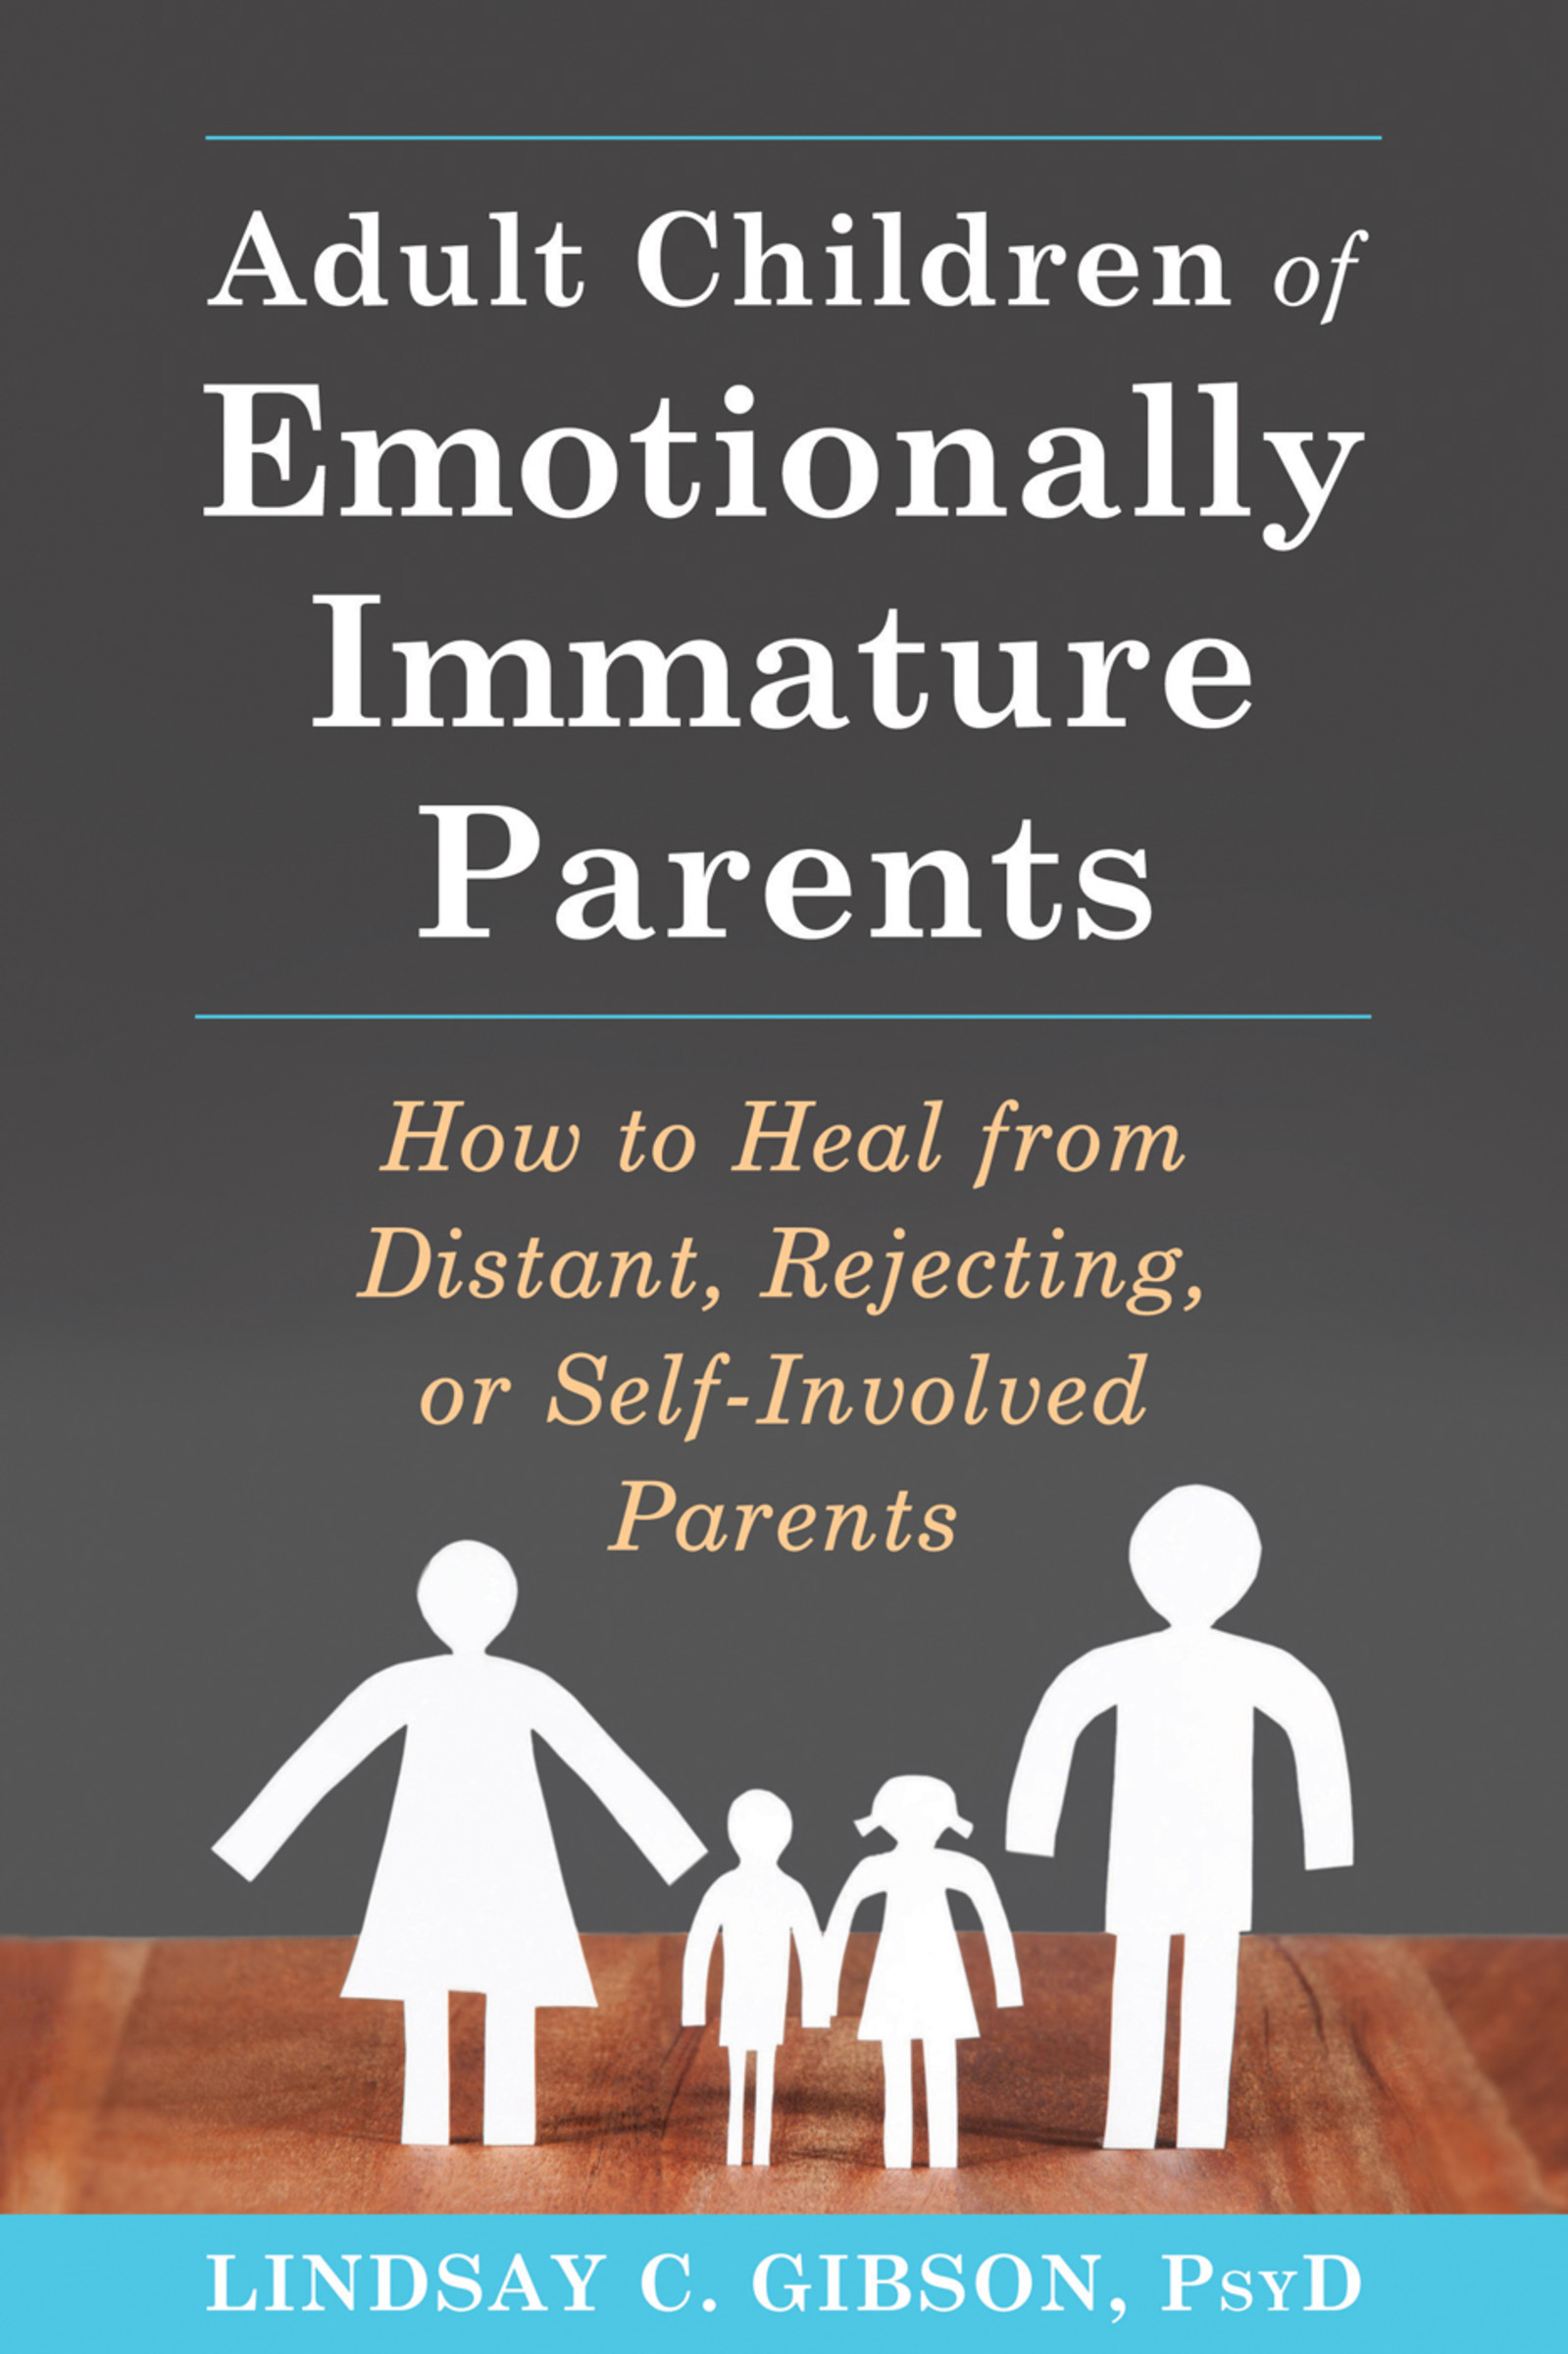 Adult Children of Emotionally Immature Parents : How to Heal from Distant, Rejecting, or Self-Involved Parents | Psychology & Self-Improvement